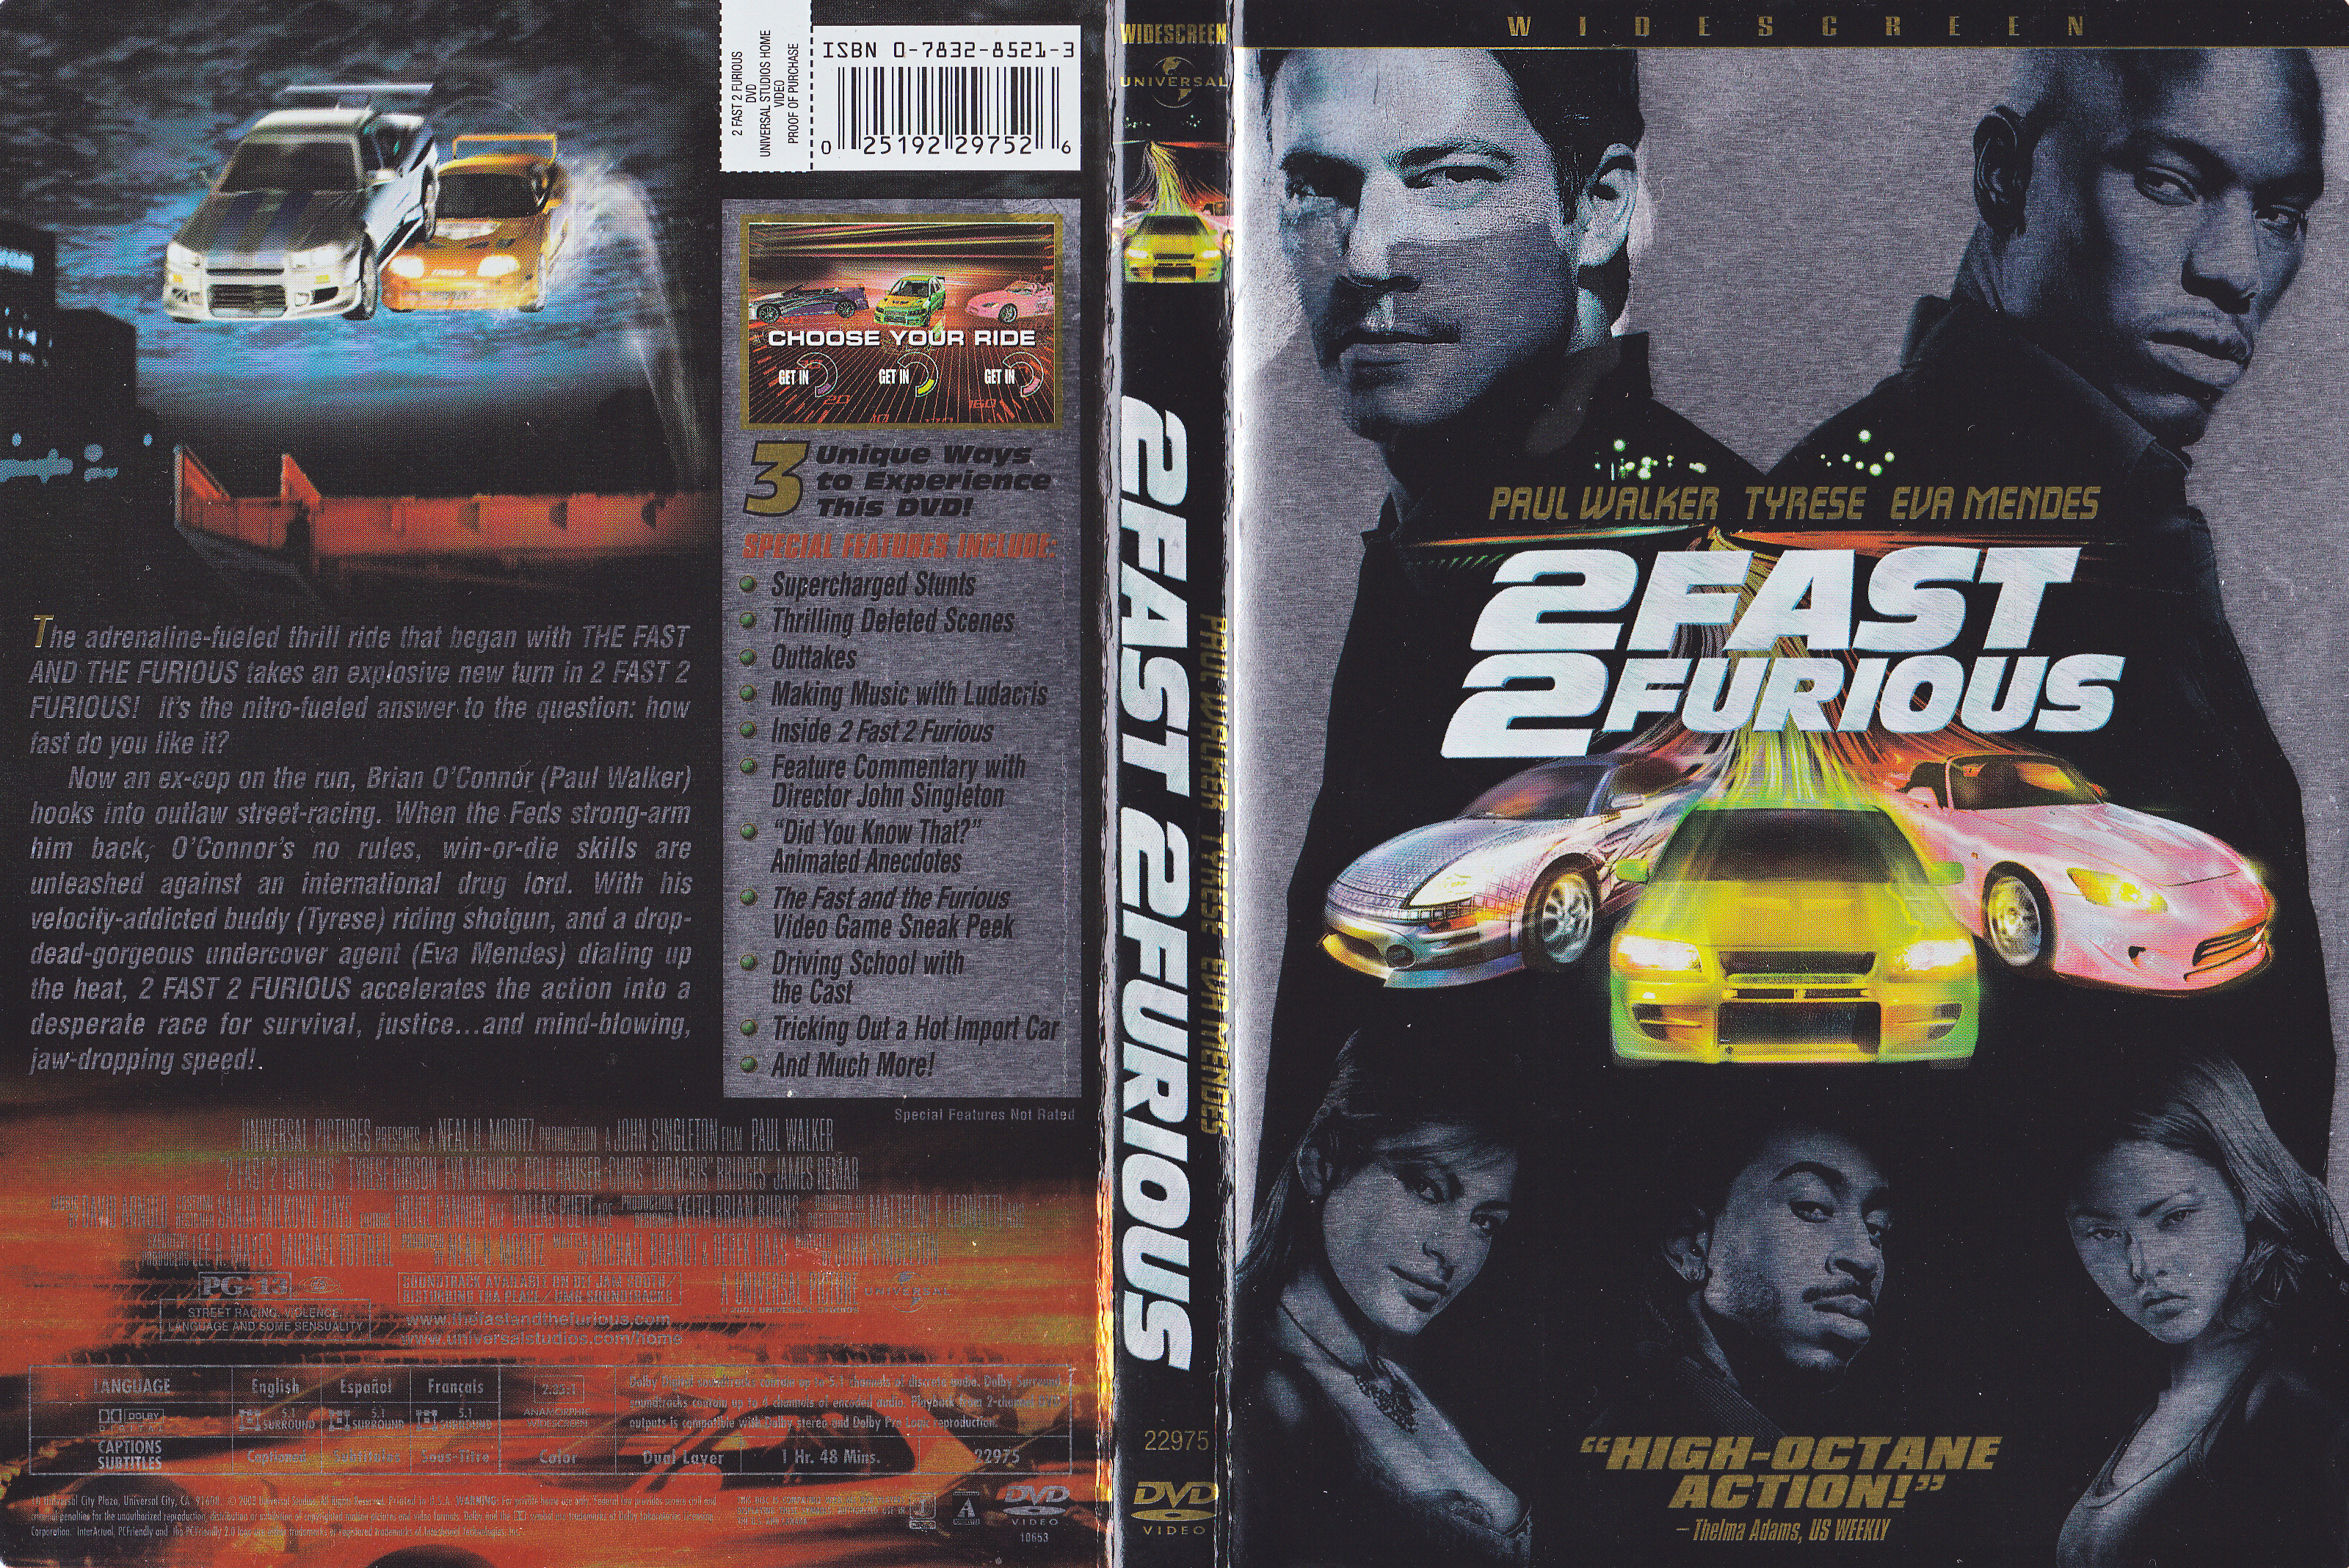 Jaquette DVD 2 fast 2 furious (Canadienne)